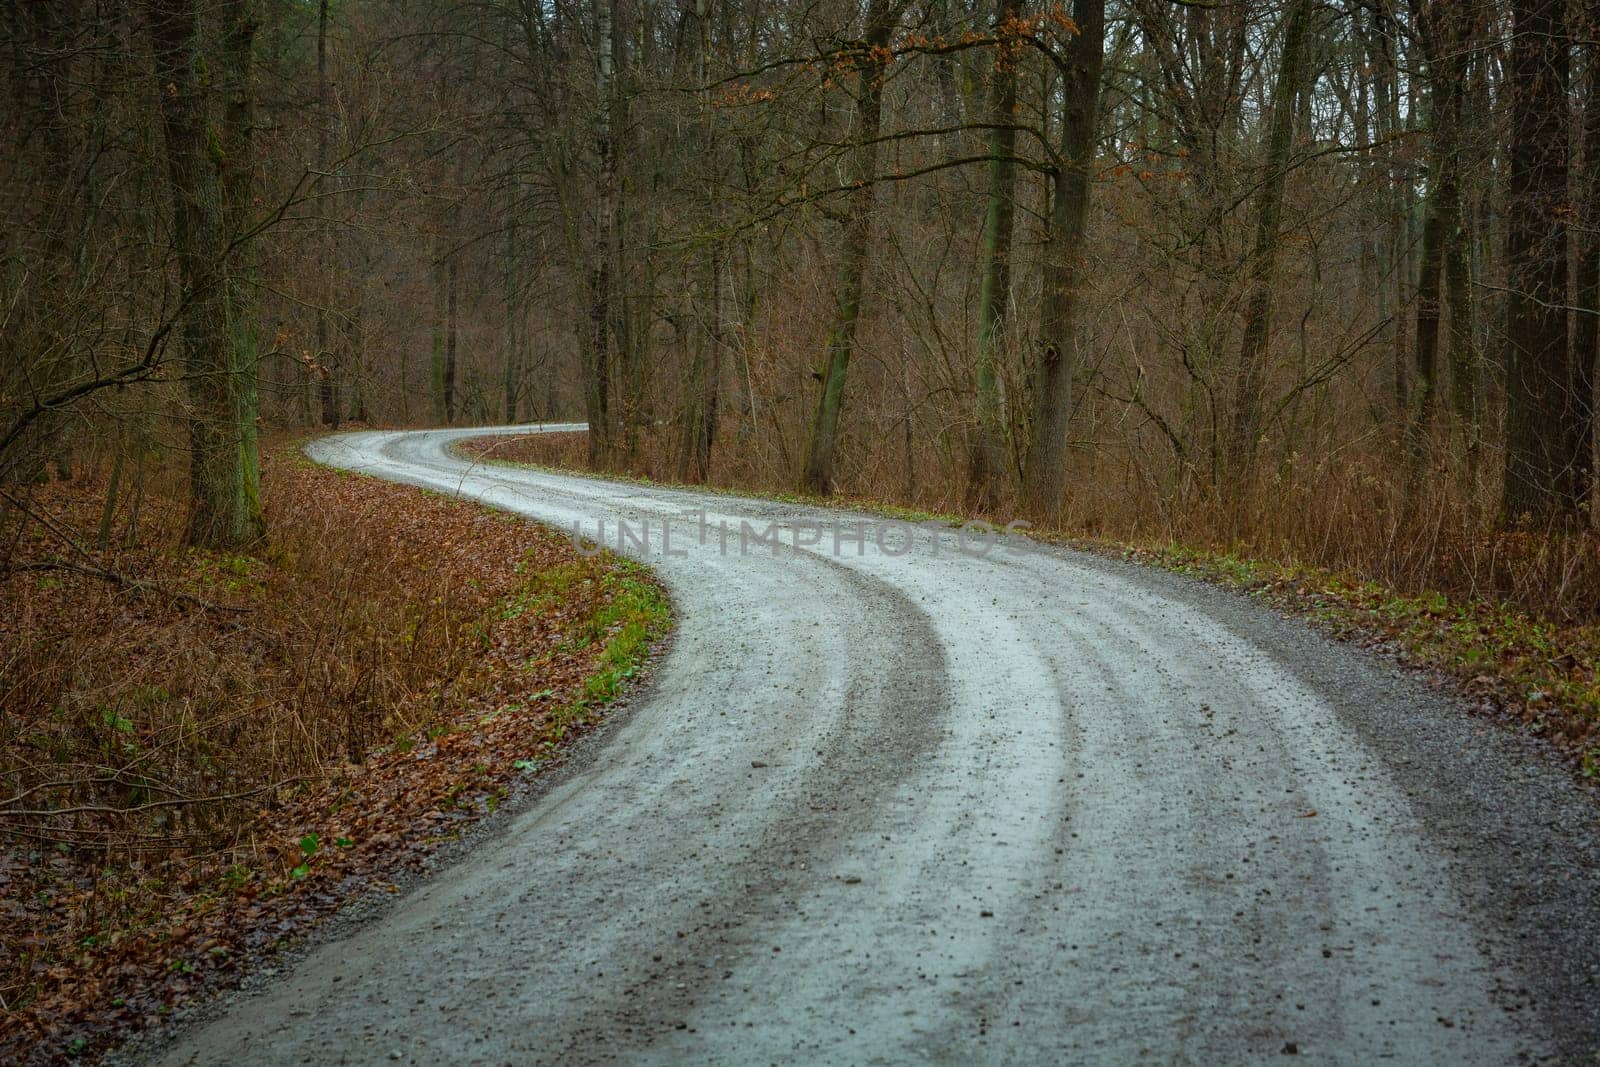 Double bend on the gravel road in the forest by darekb22